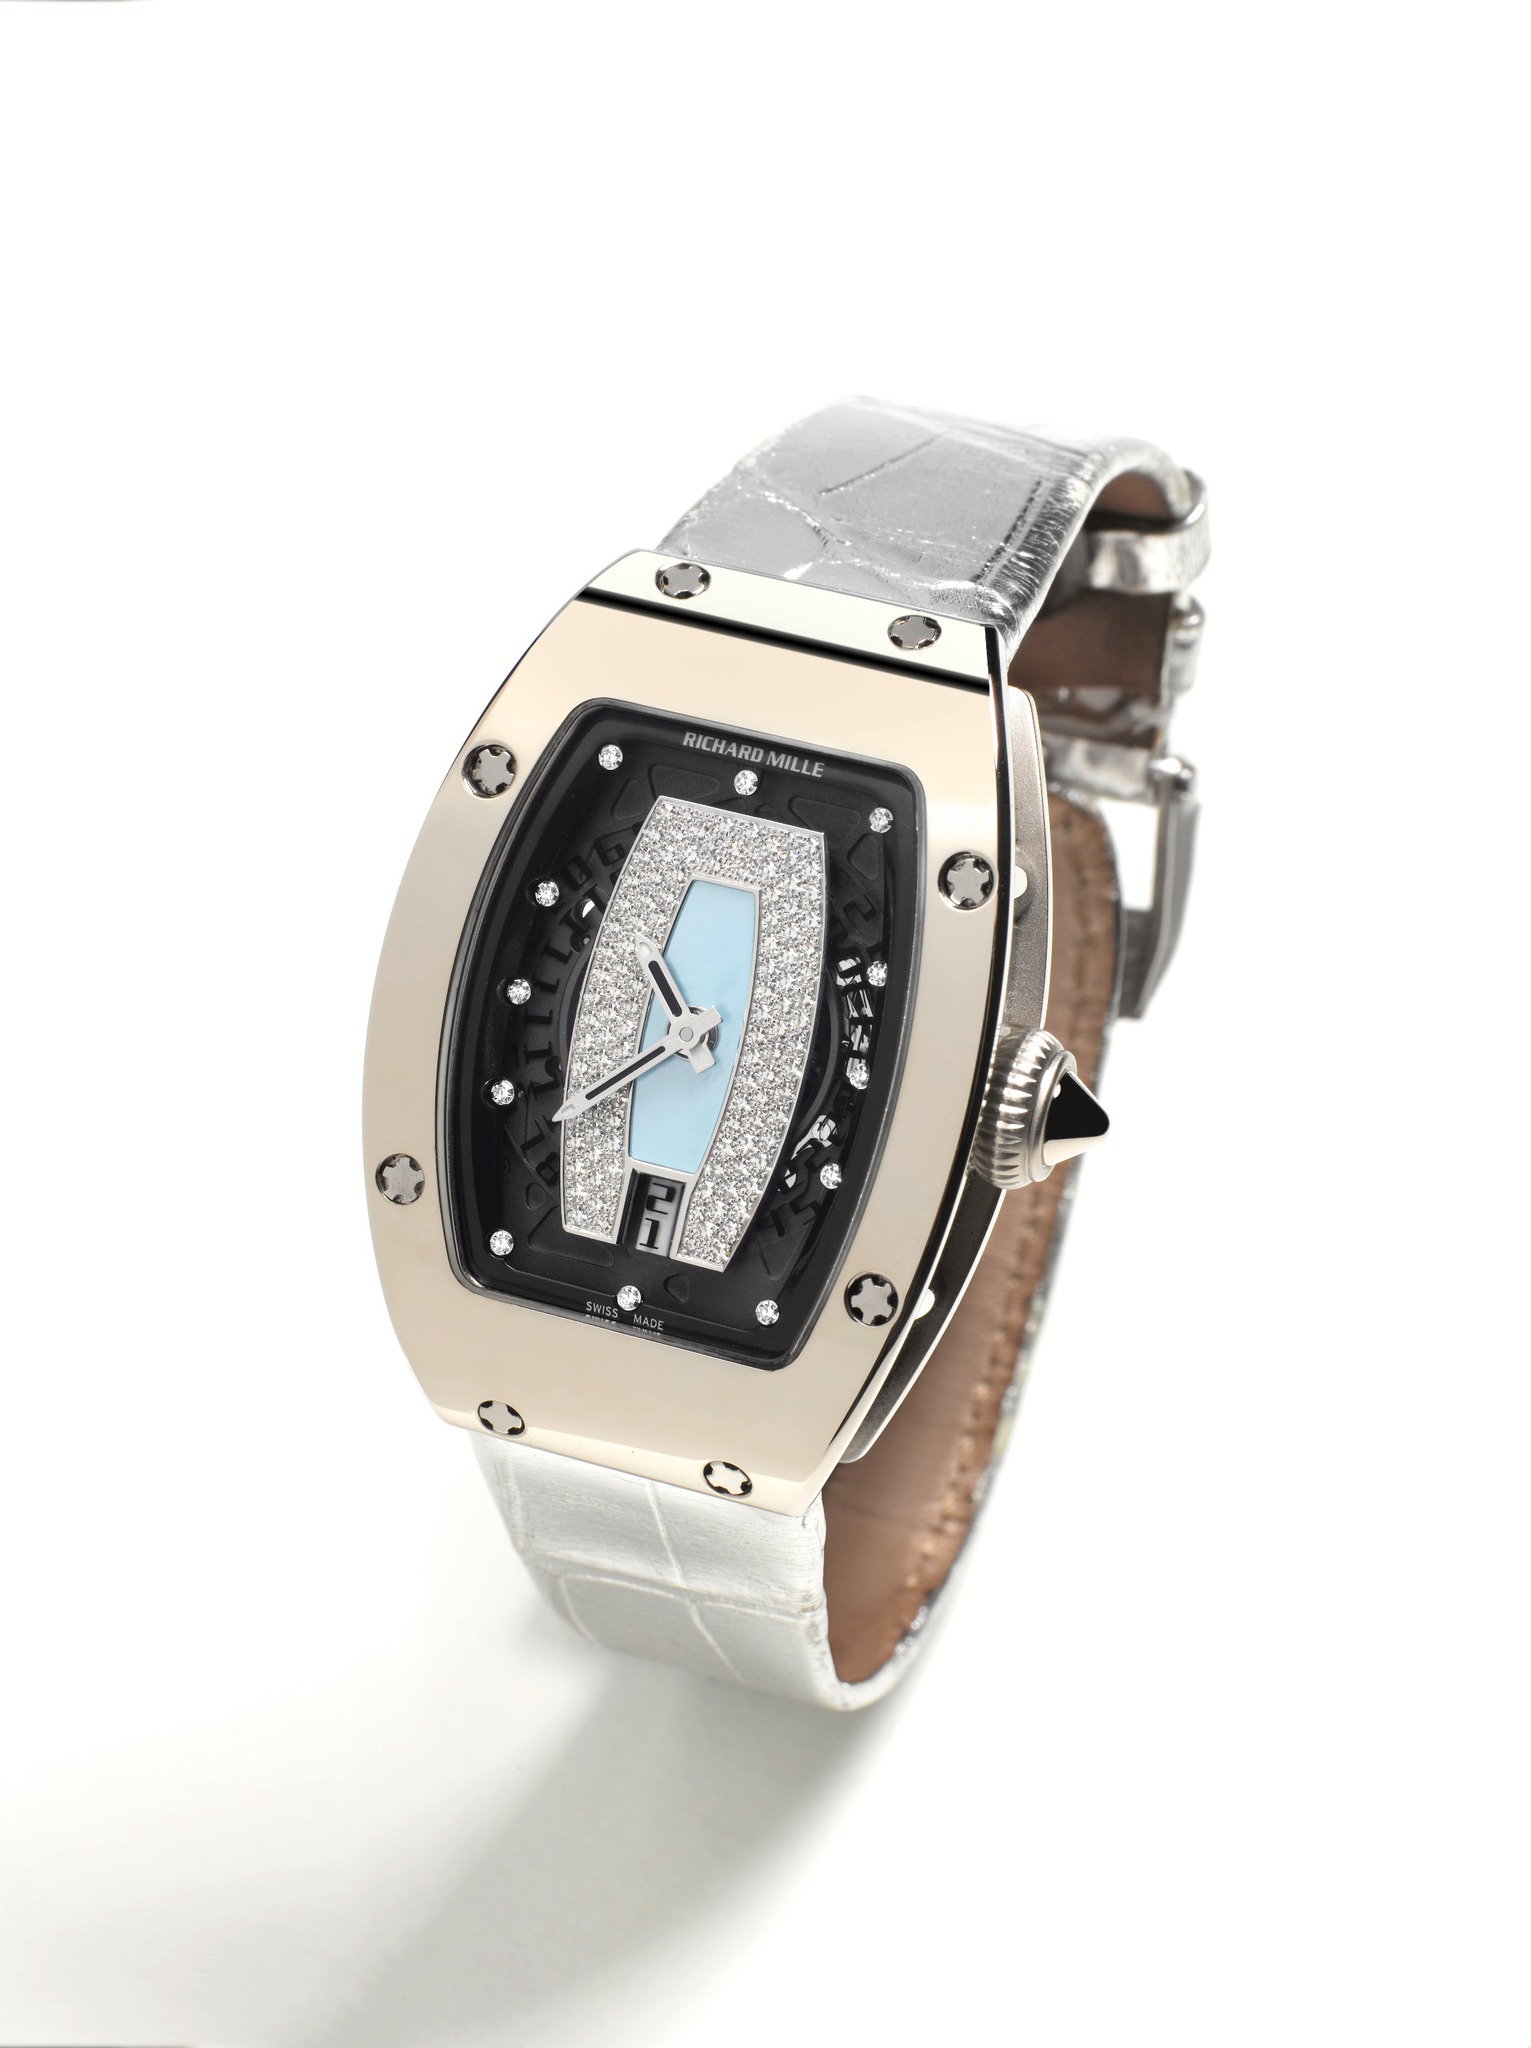 Replica Richard Mille RM 007 White Gold and Silver Alligator Watch